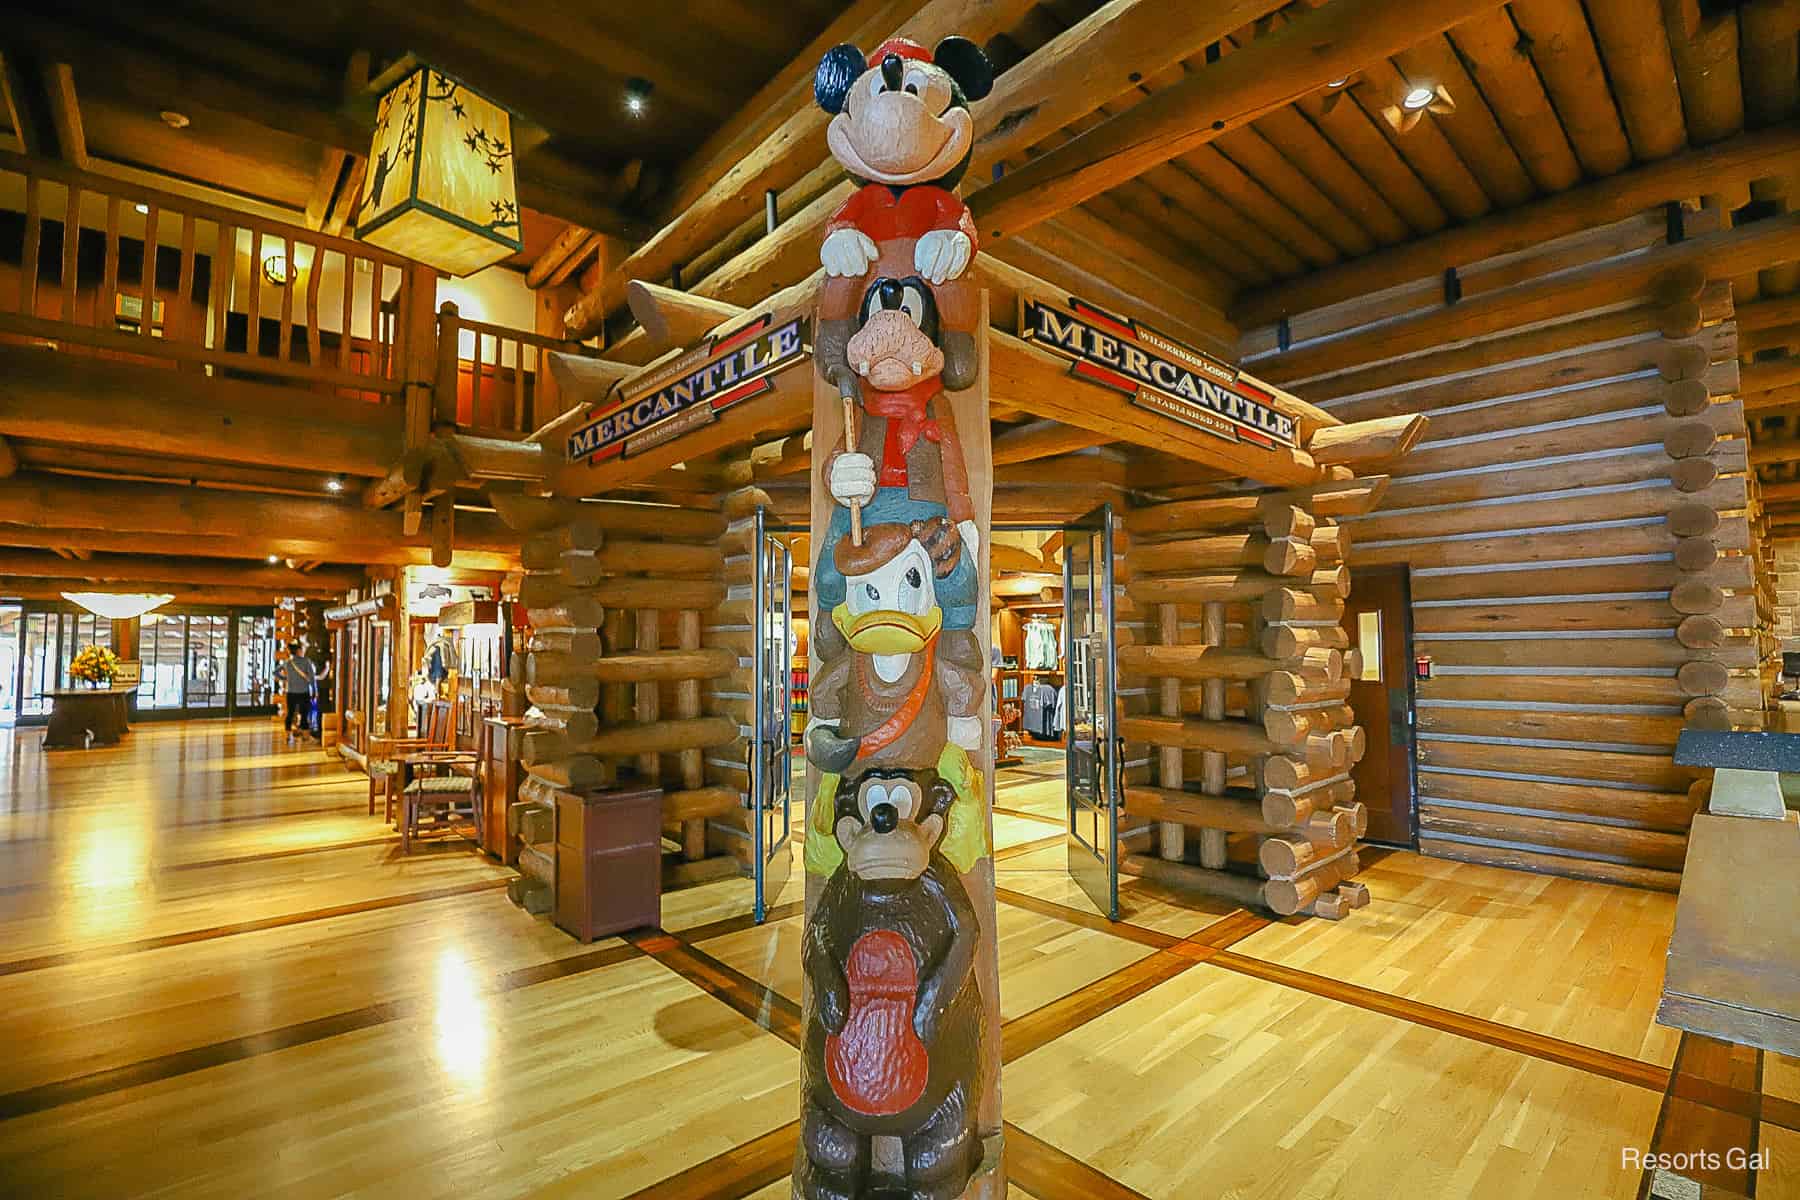 a totem pole in front of Wilderness Lodge Mercantile with Humphrey, Donald, Goofy, and Mickey 